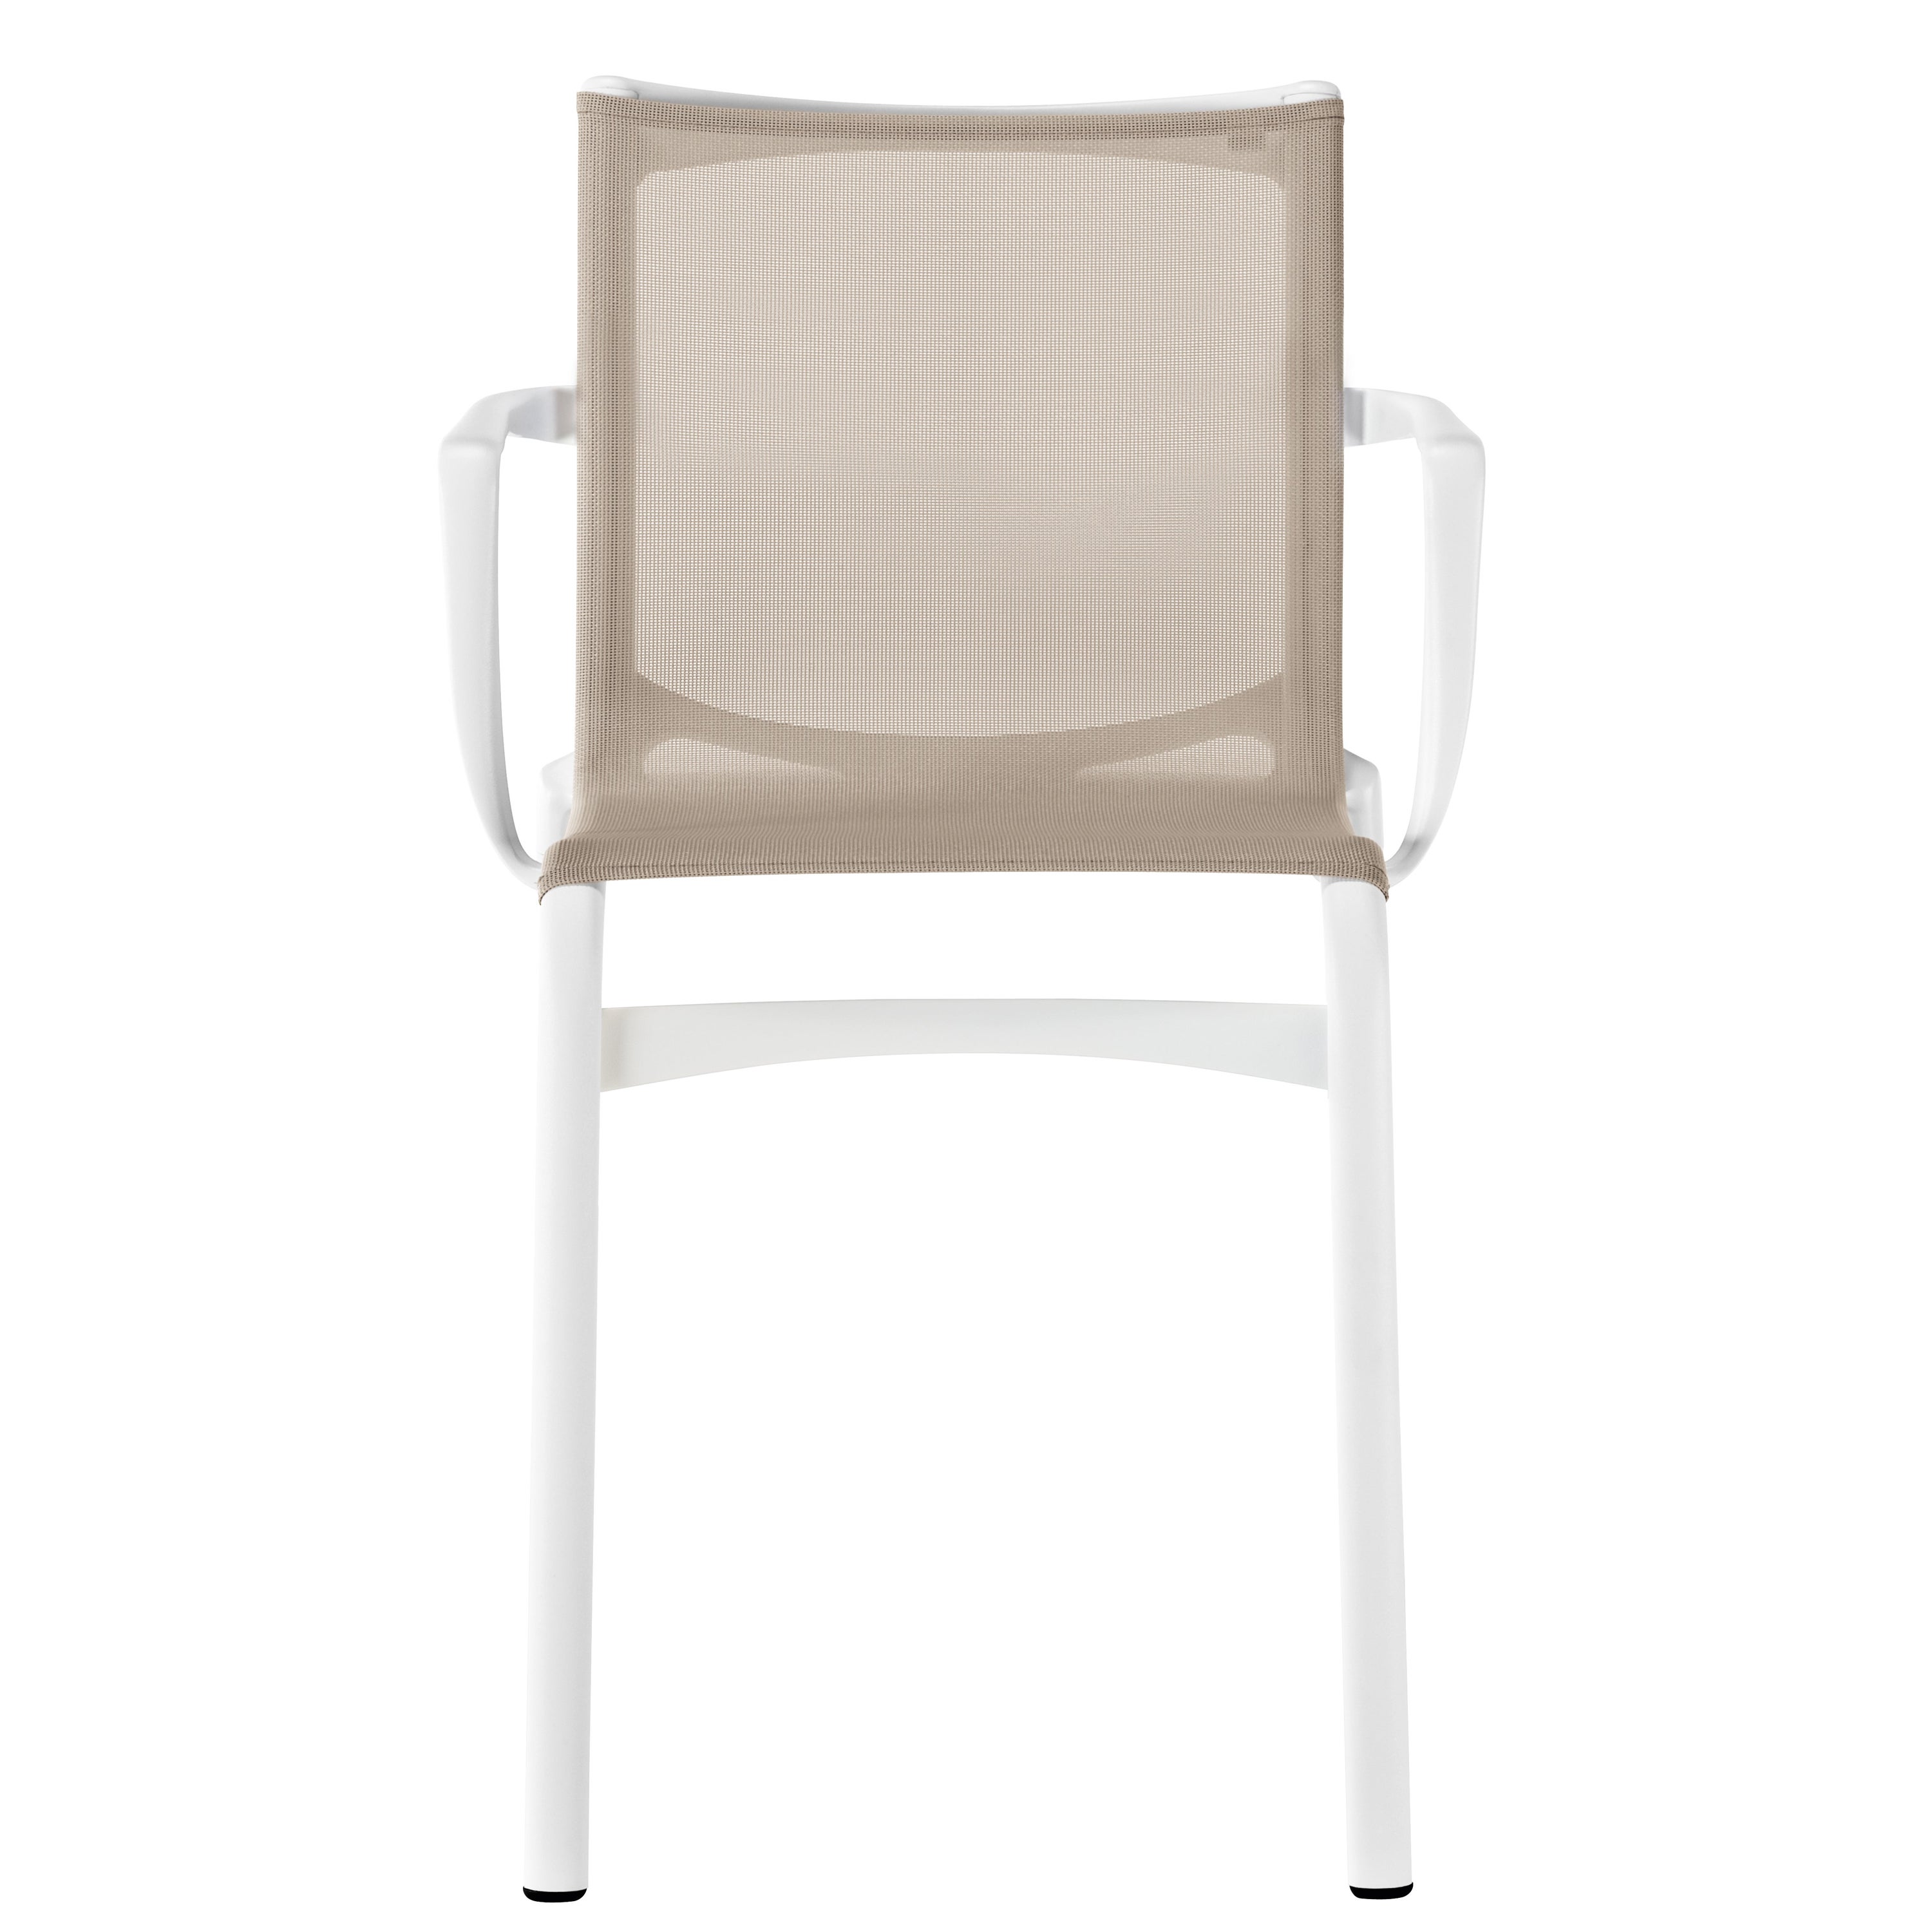 Alias 417 Highframe 40 Chair in Sand Mesh with White Lacquered Aluminium Frame For Sale